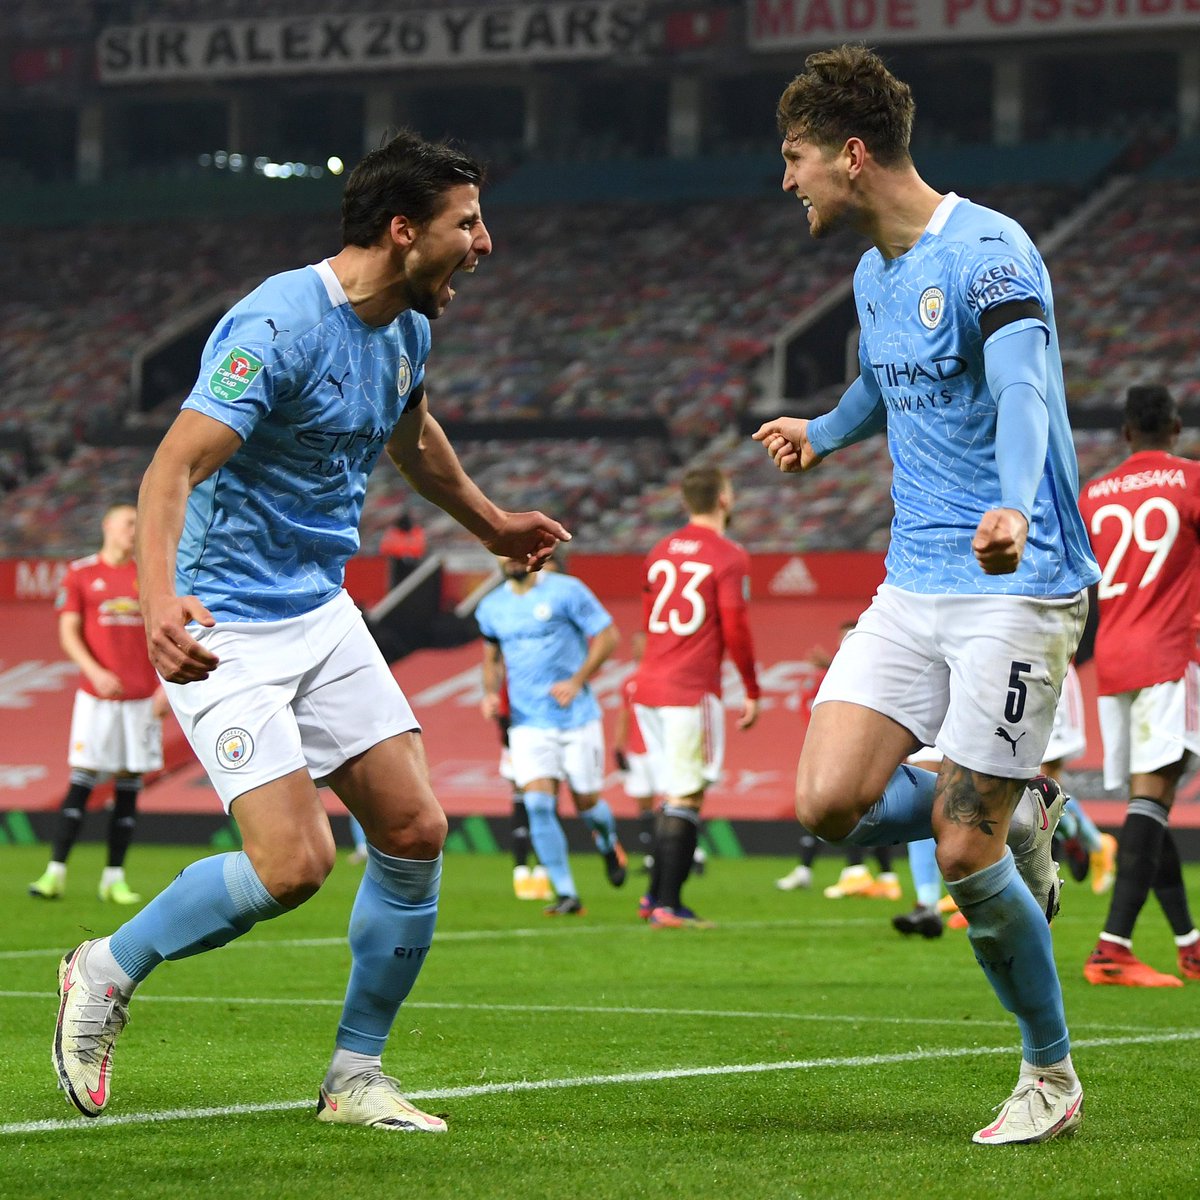 Man City reach fourth consecutive League Cup final with entertaining win over Man United - 2